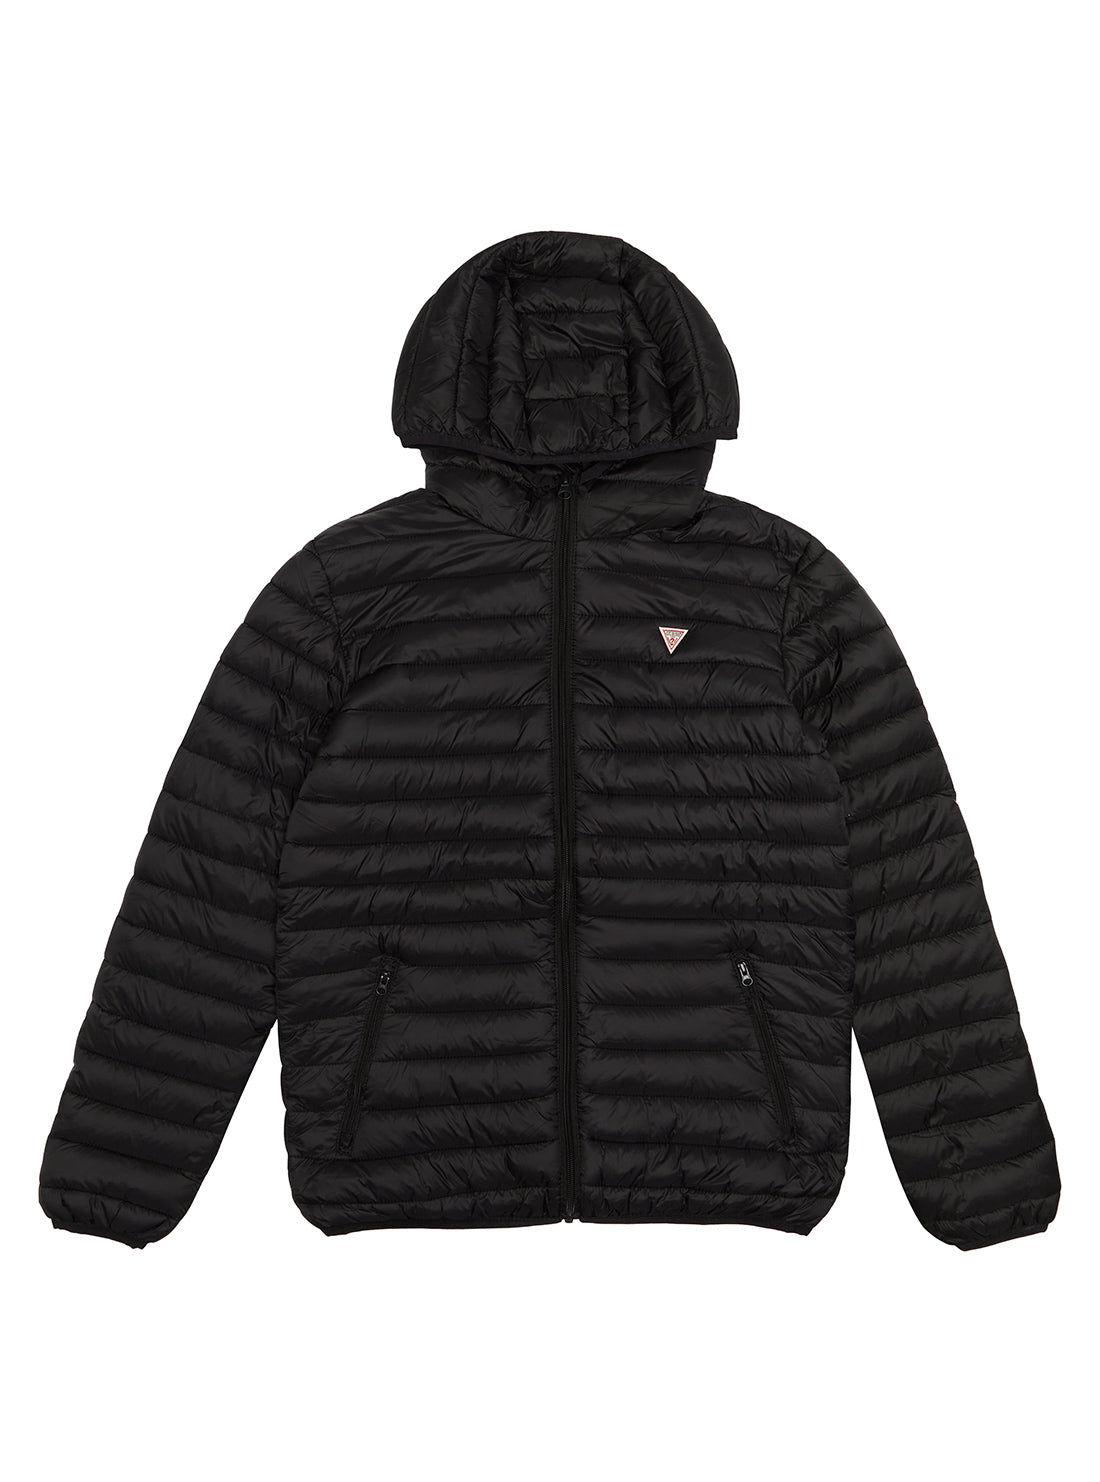 GUESS Big Kids Black Padded Jacket (7-16) H93J00WCAO0 Front View